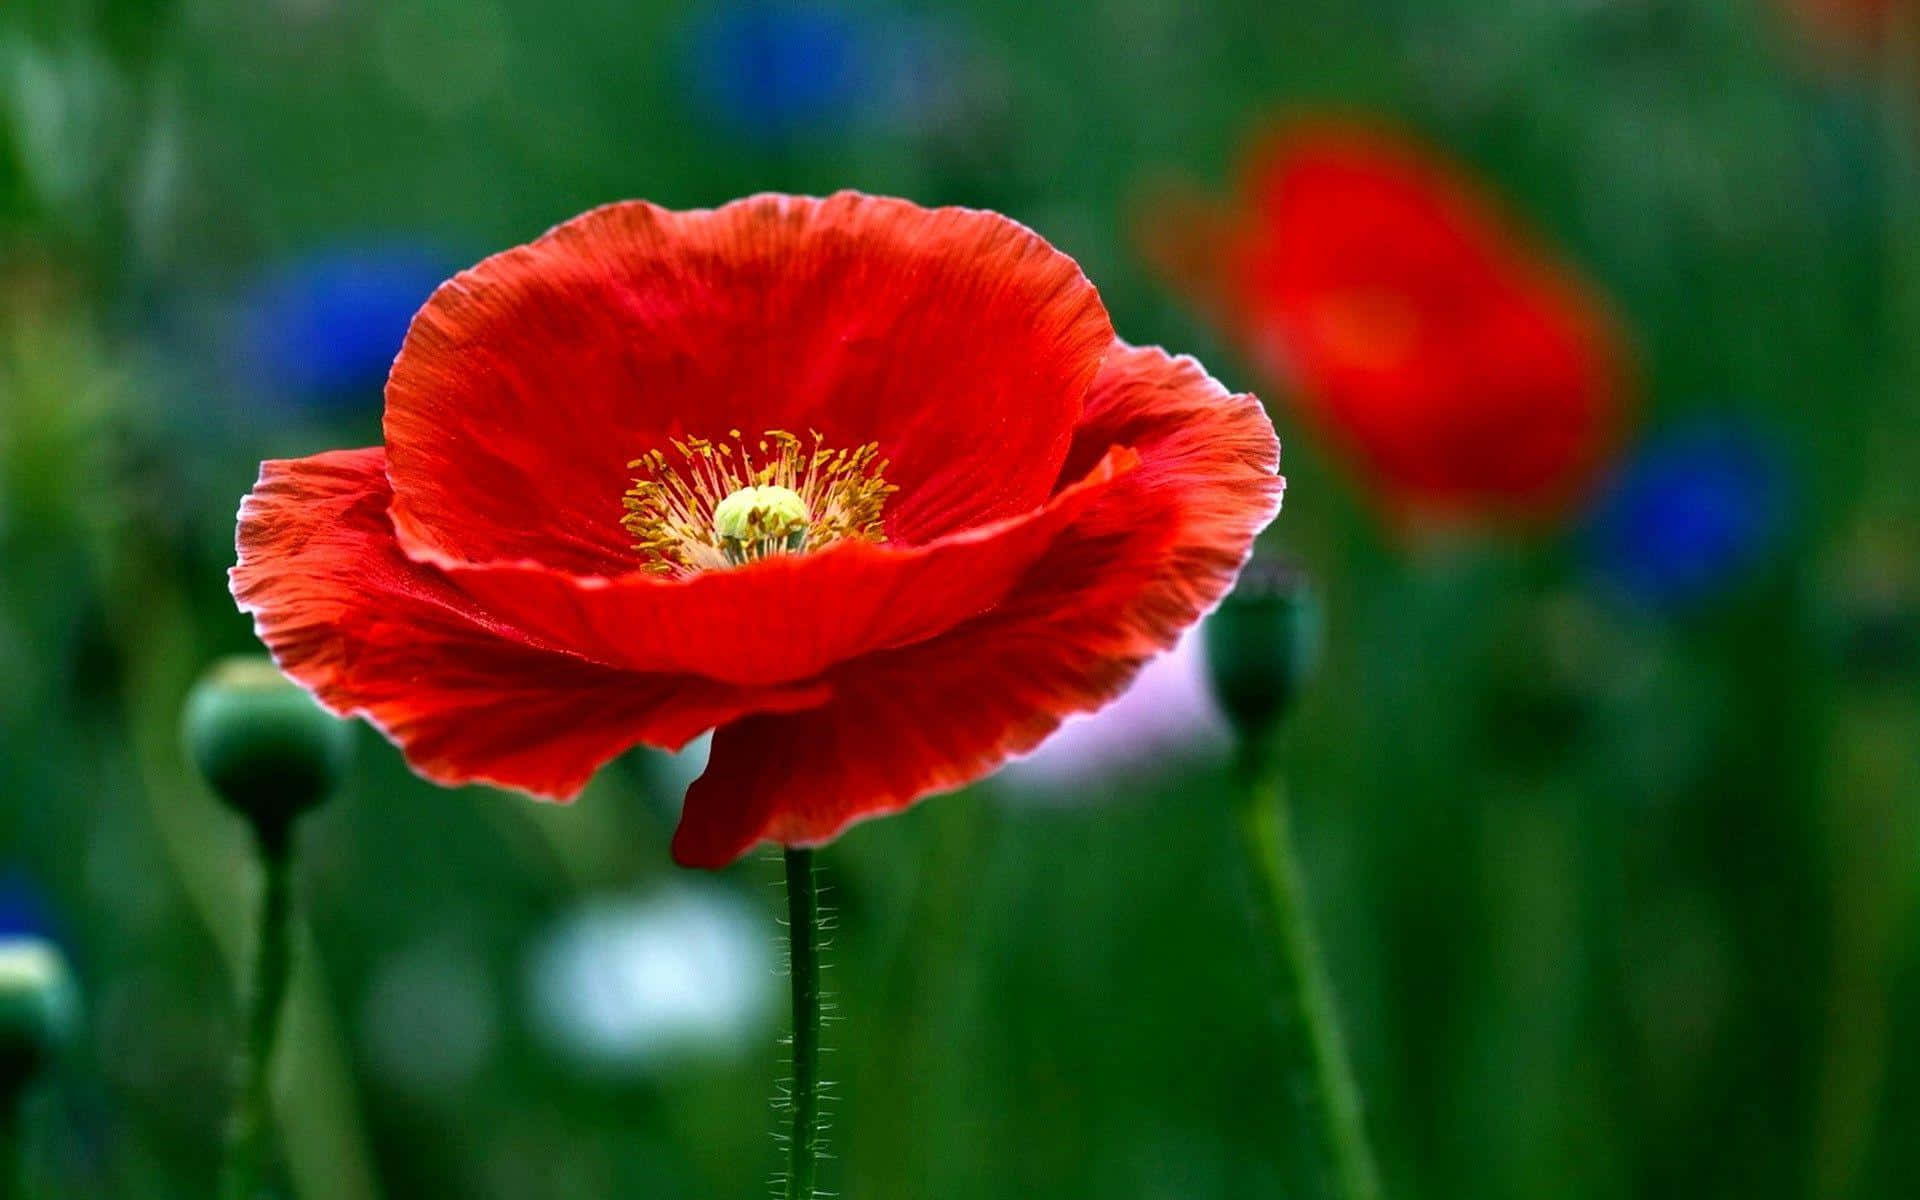 A Red Poppy Flower Is In The Middle Of A Field